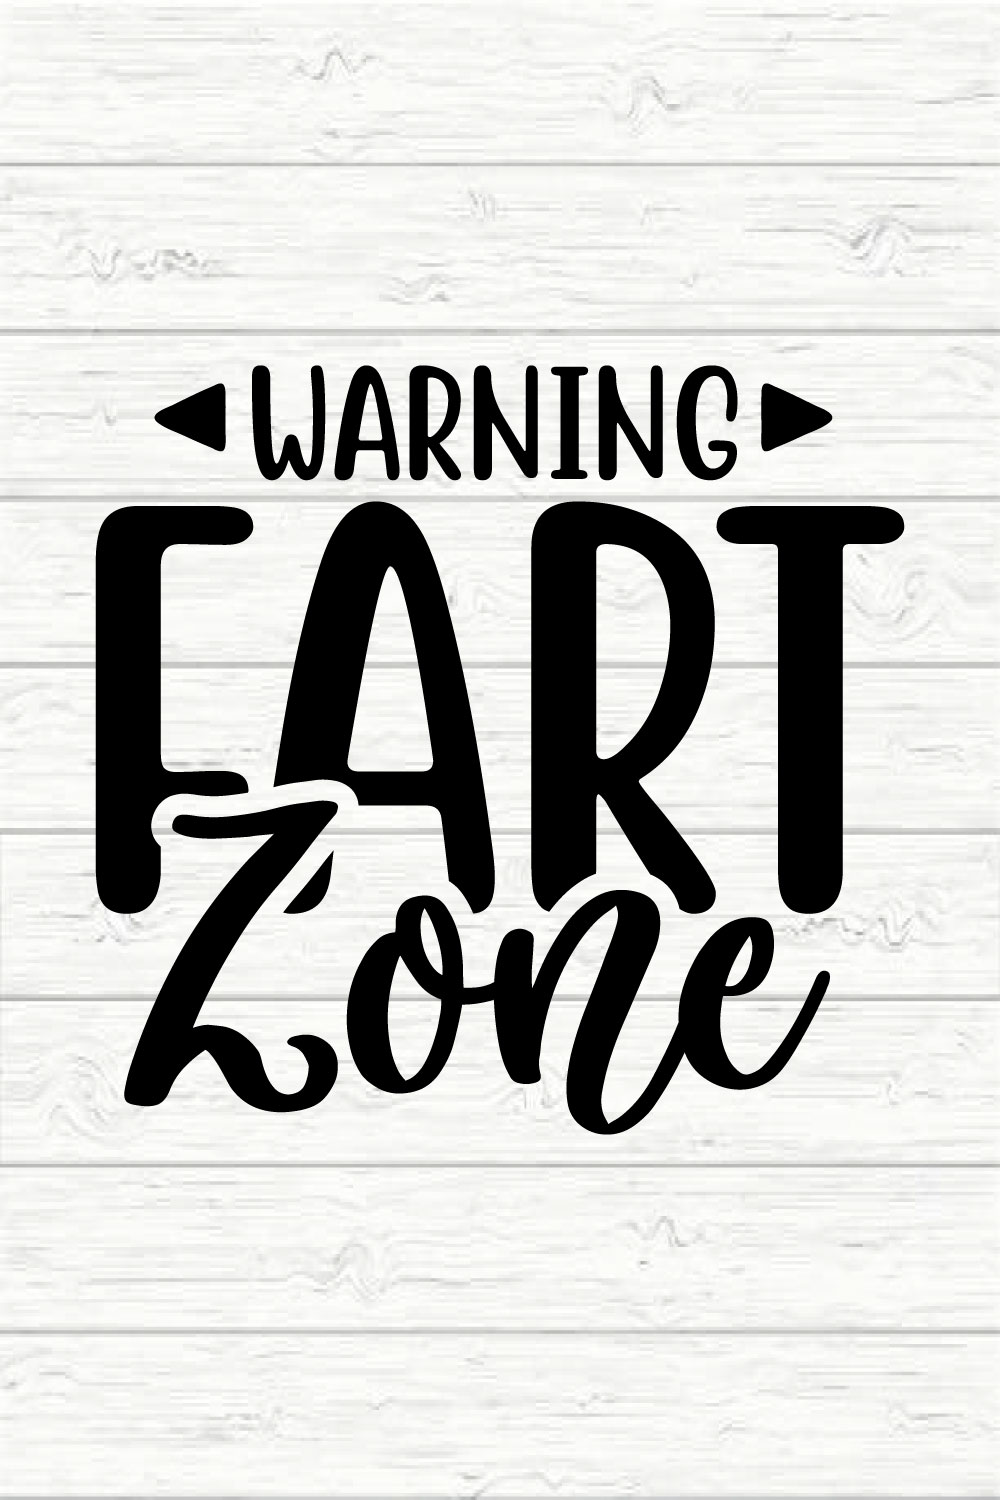 Warning fart zone pinterest preview image.